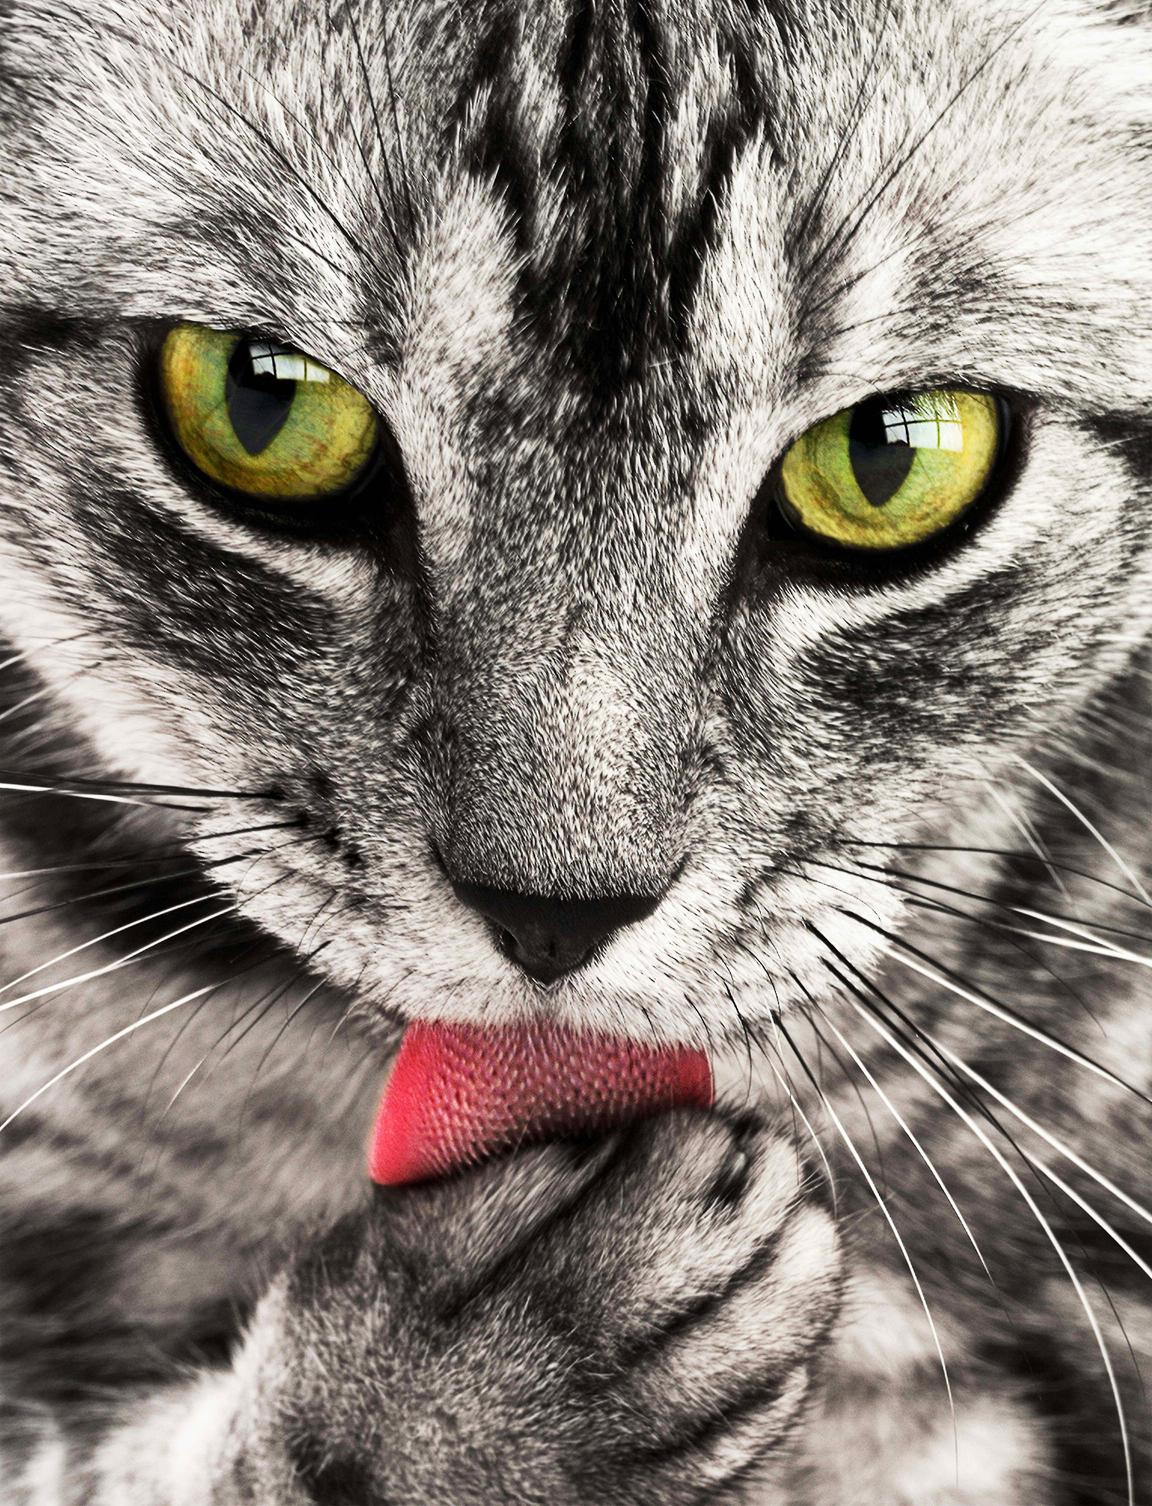 The biological reasons: examining the biological, instinctual basis for cats licking eyes